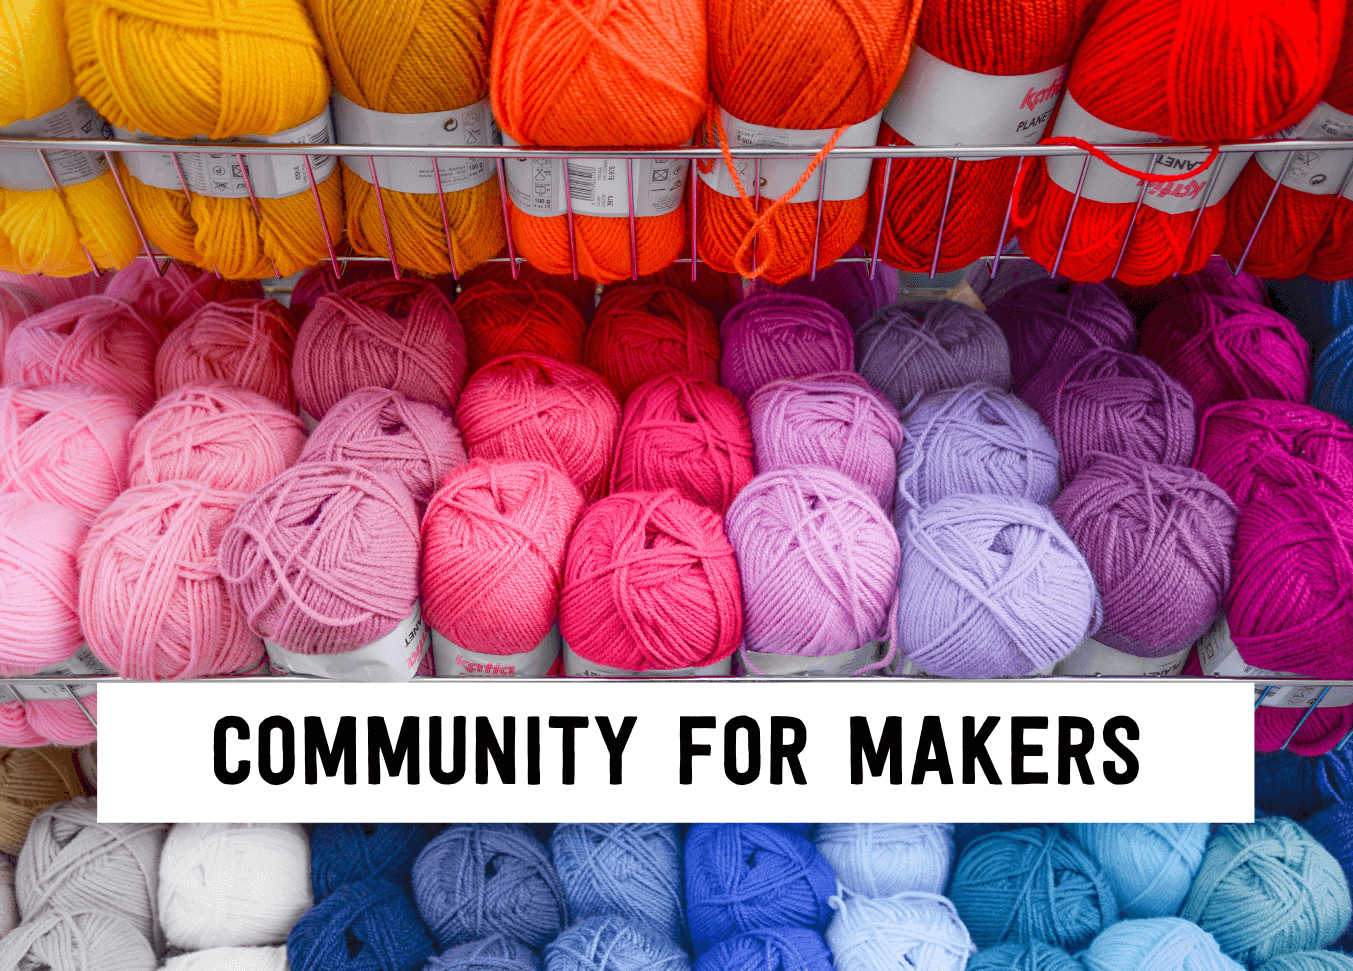 Community for makers | Tizzit.co - start and grow a successful handmade business